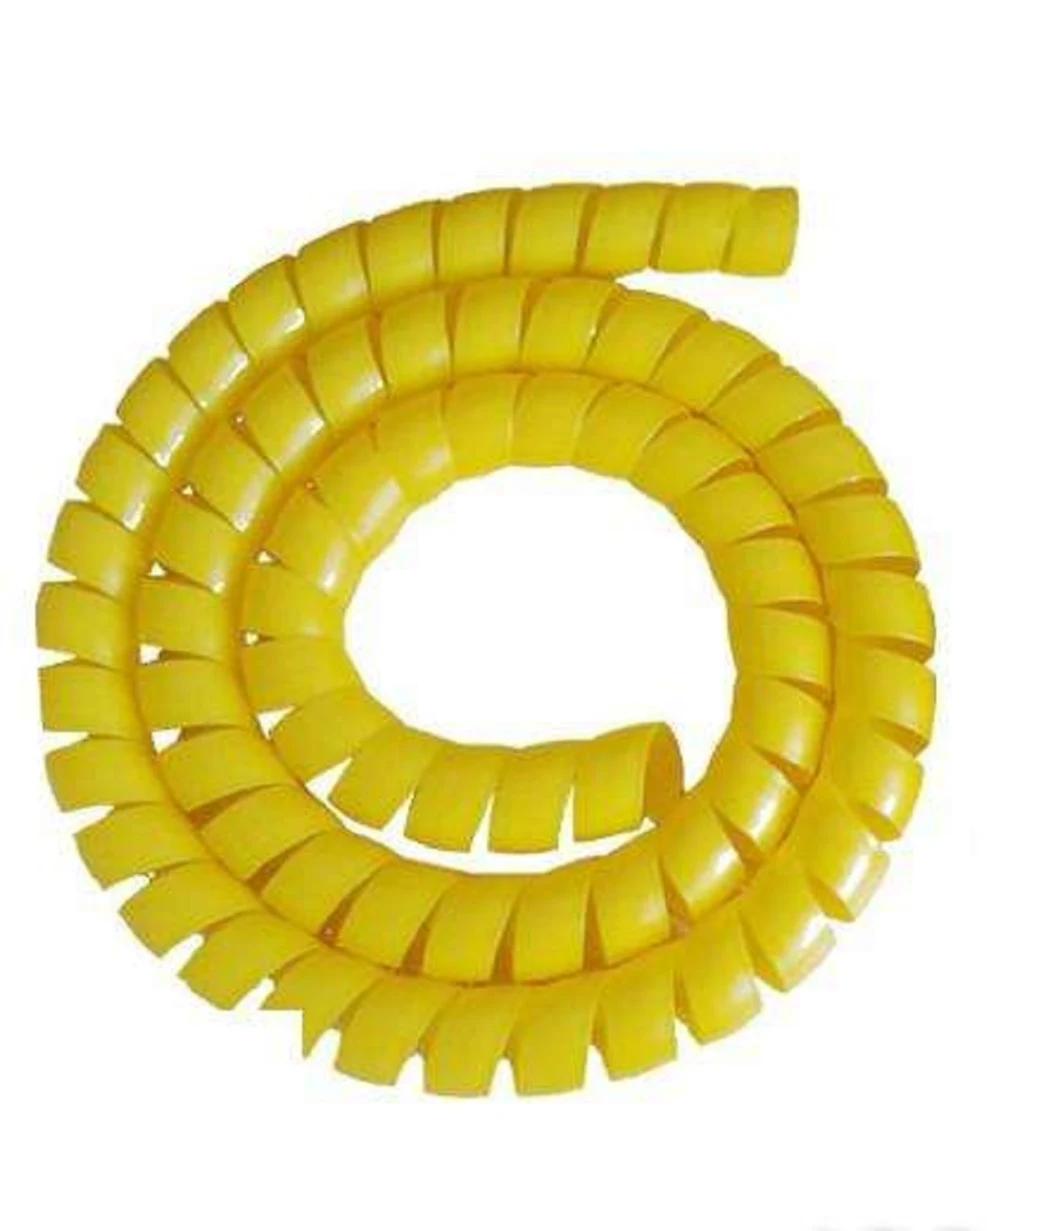 Colorful Hydraulic Rubber Hose Protector Guard